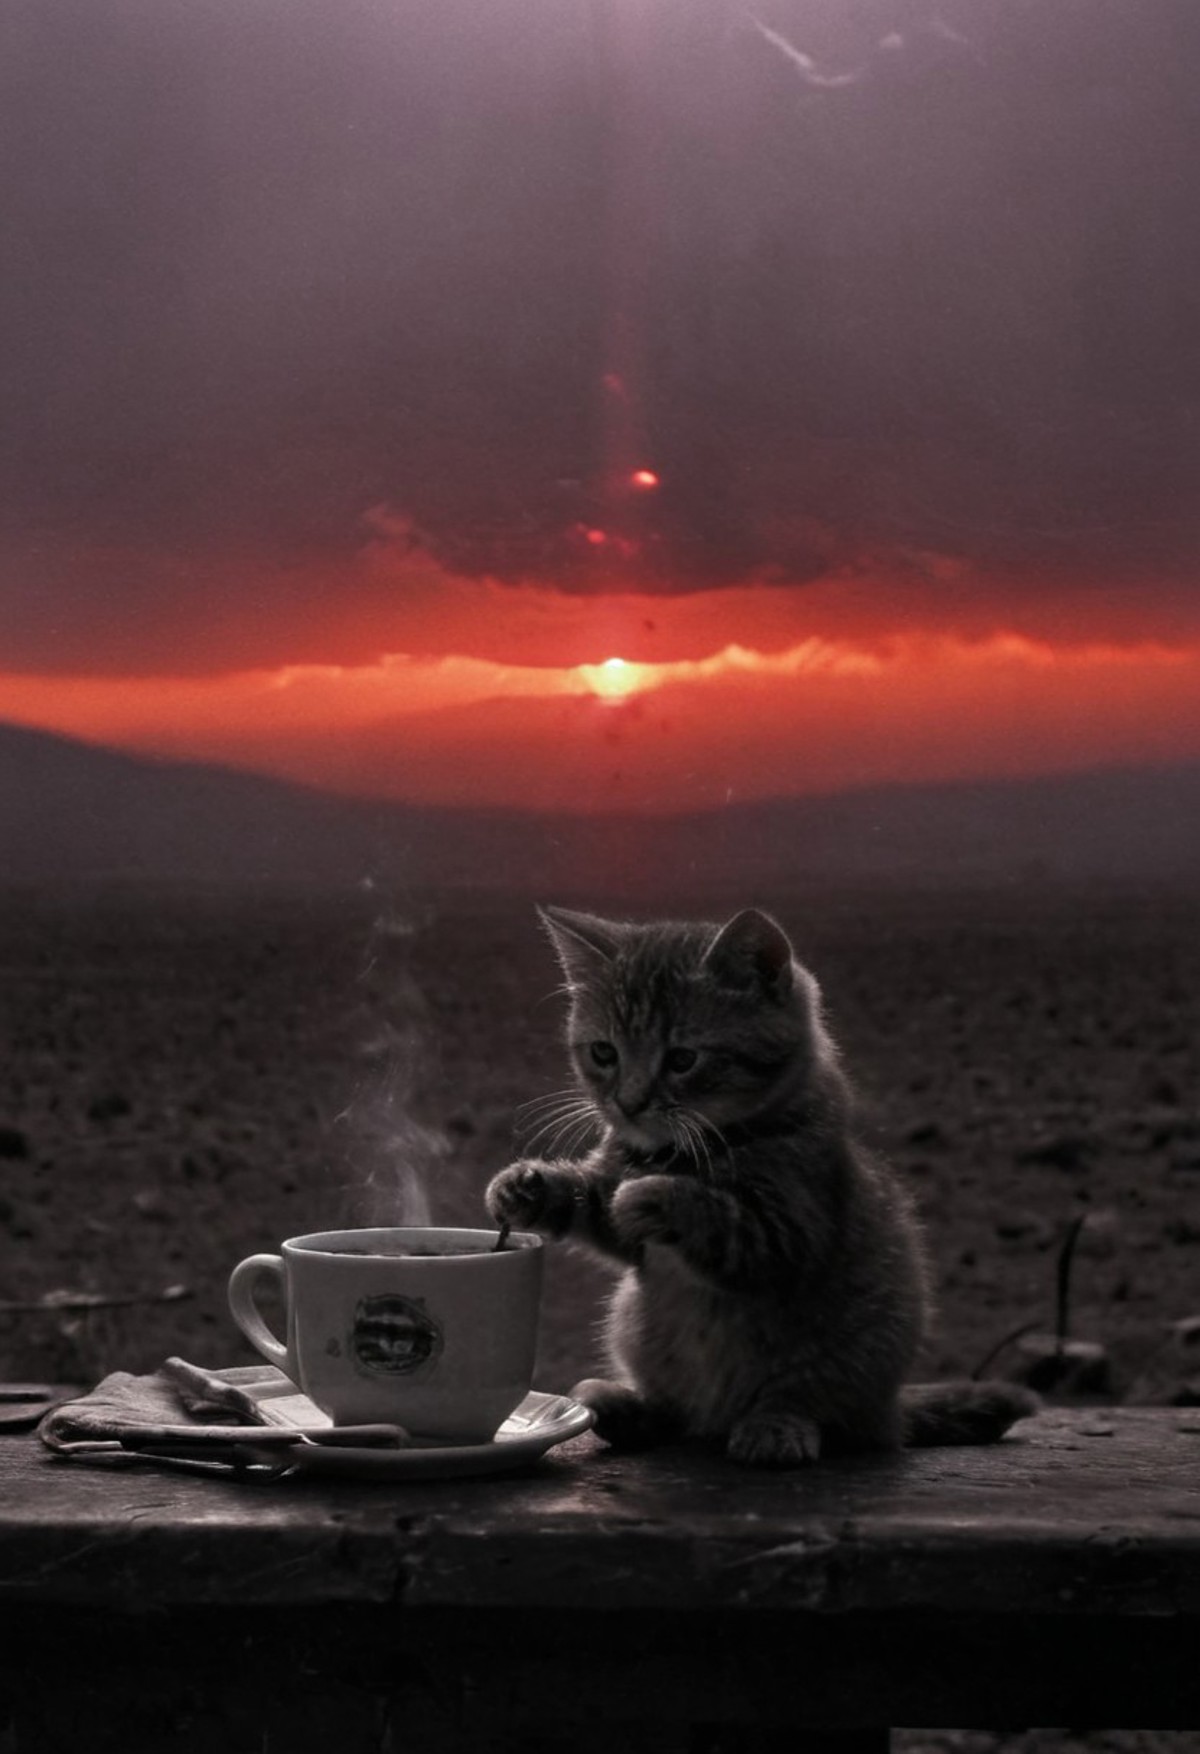 A kitten sitting in front of a steaming cup of coffee on a wooden surface. The backdrop features an expansive view of a barren landscape under a dusky sky. The setting sun on the horizon emits a red glow that bathes the scene in warm hues. 